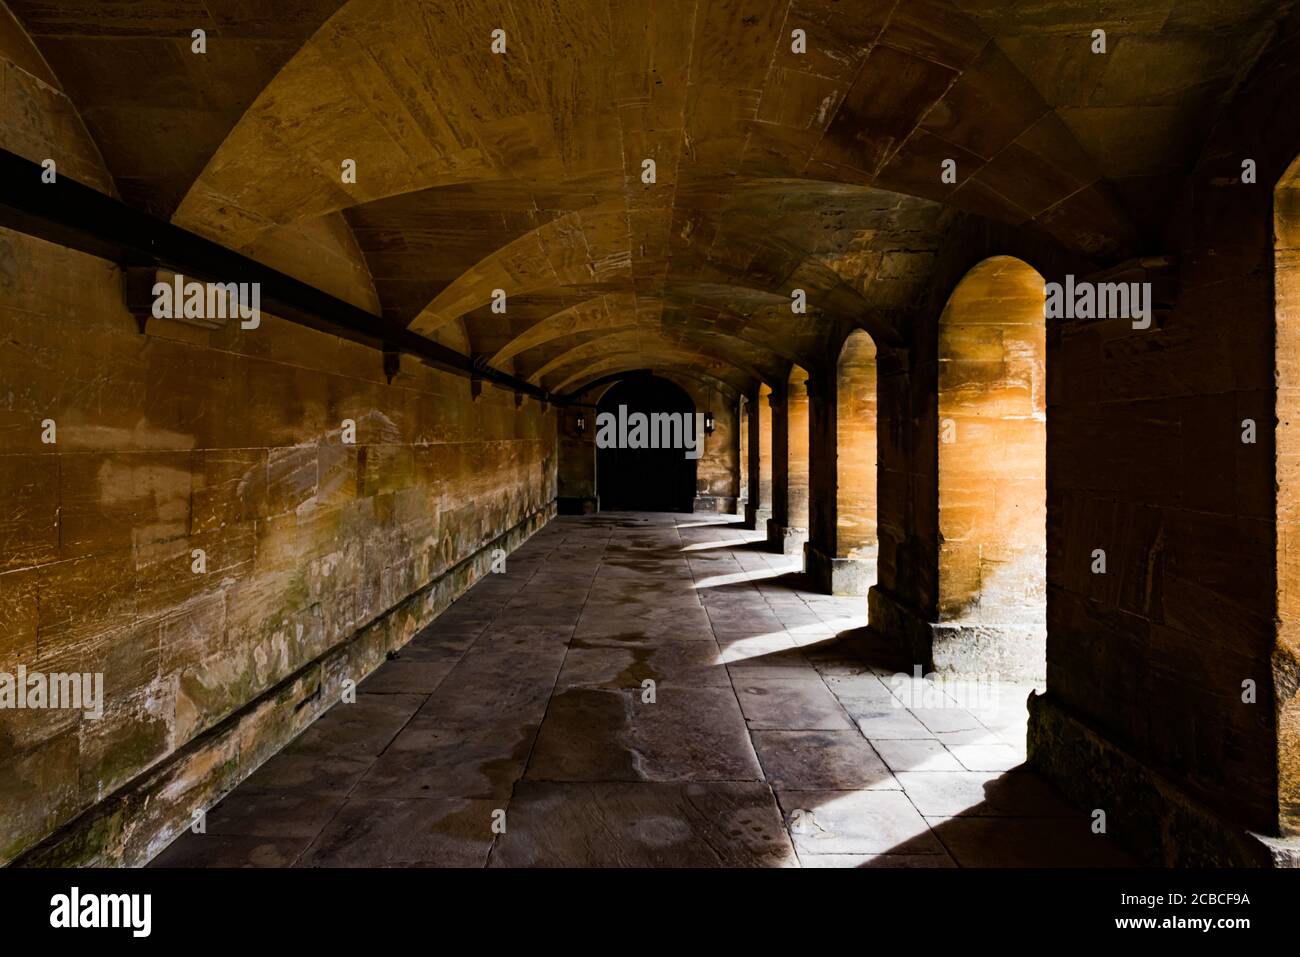 Paved Portico with Arches Leading to a Distant Doorway Stock Photo